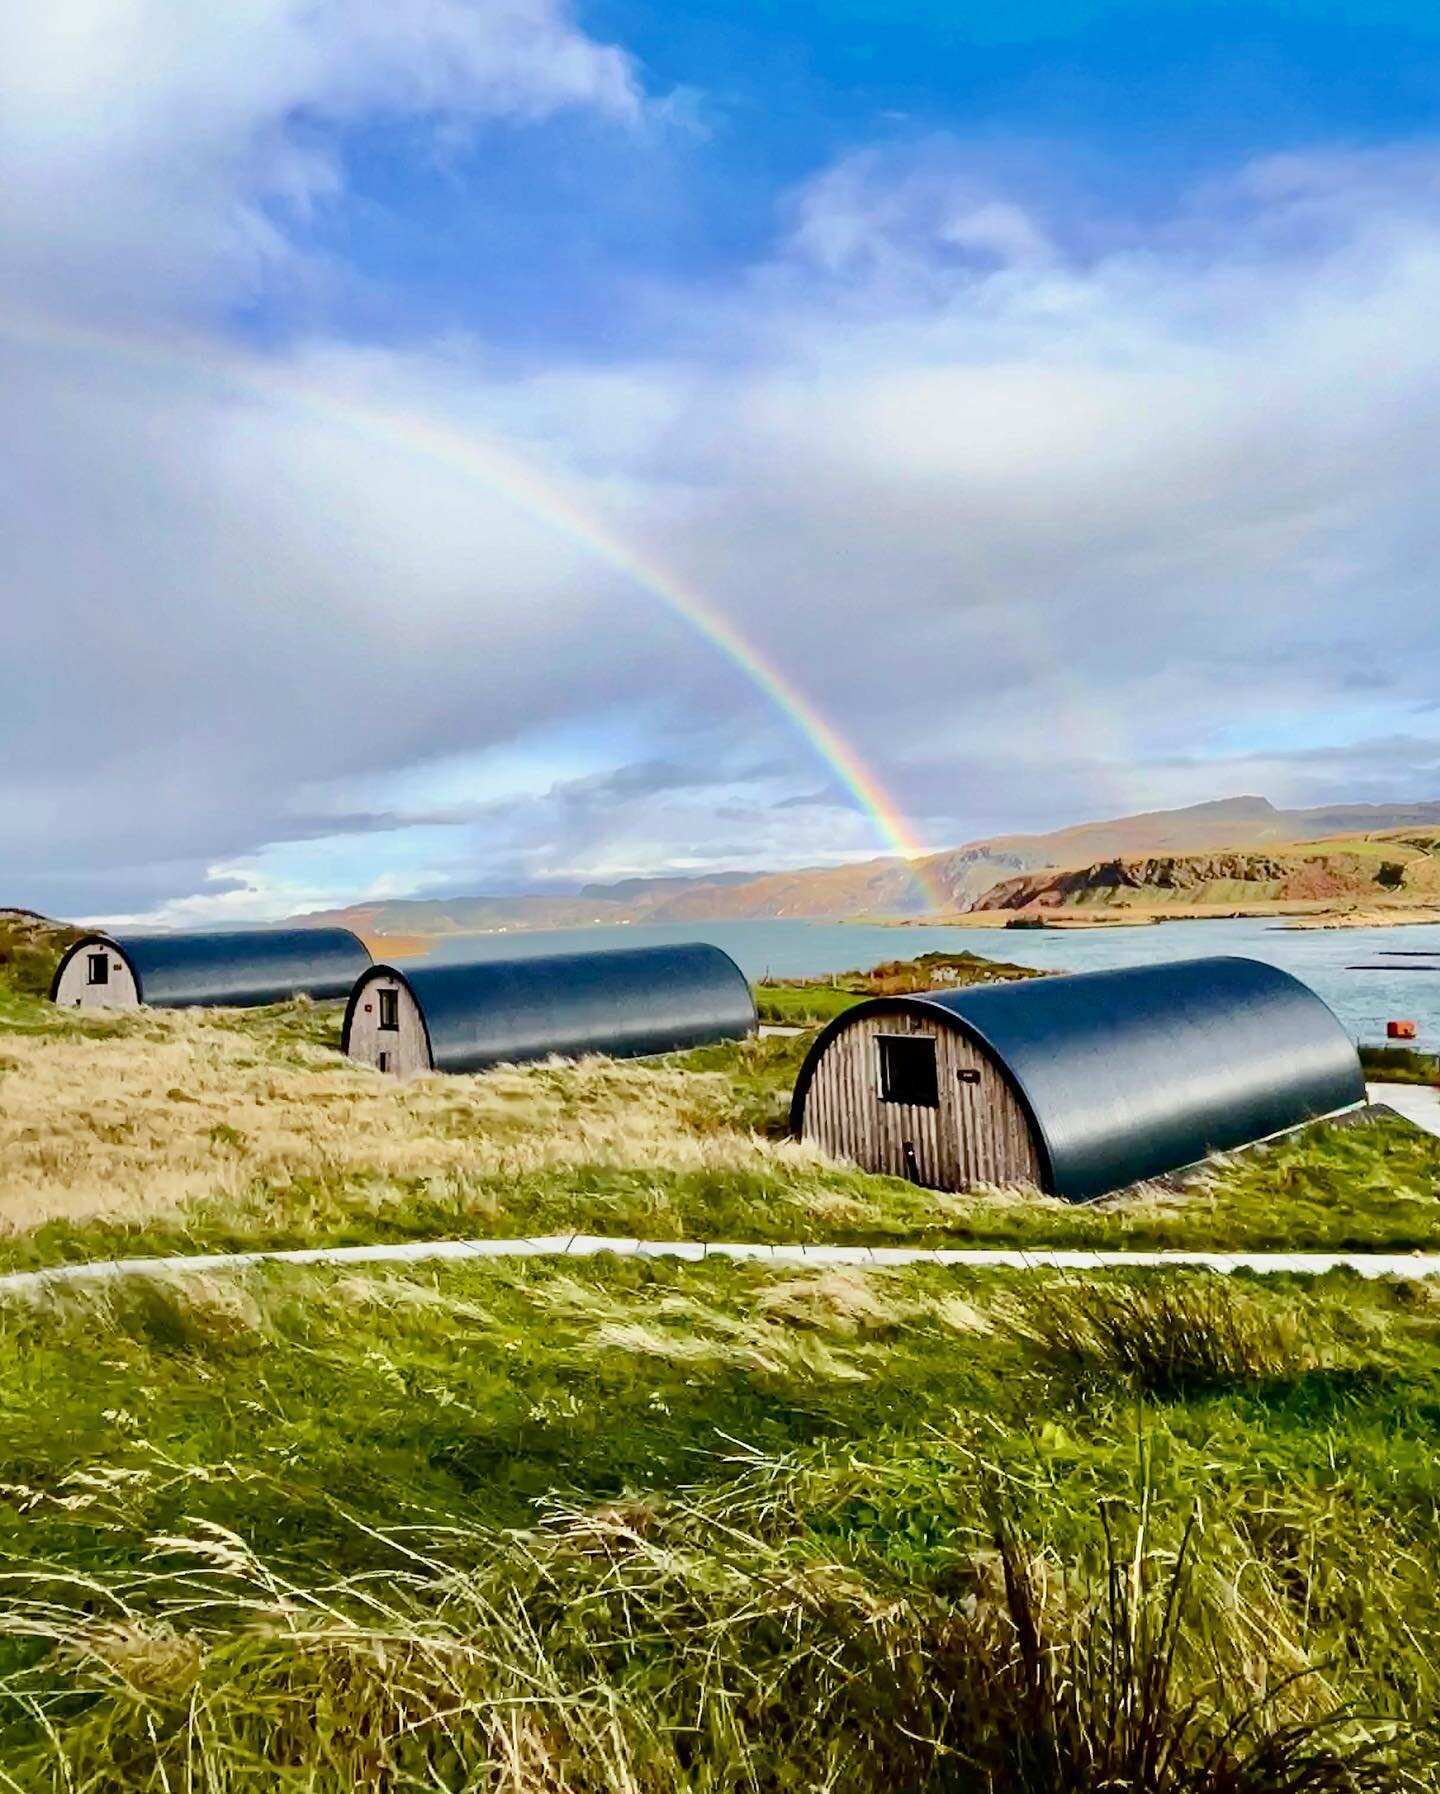 Check out this incredible rainbow over WildLuing this week! 

We&rsquo;d also like to take this opportunity to let you know that we&rsquo;re an LGBTQIA+ friendly space, and welcome anyone who appreciates our wild island. 

&mdash;
&mdash;
&mdash;

#l